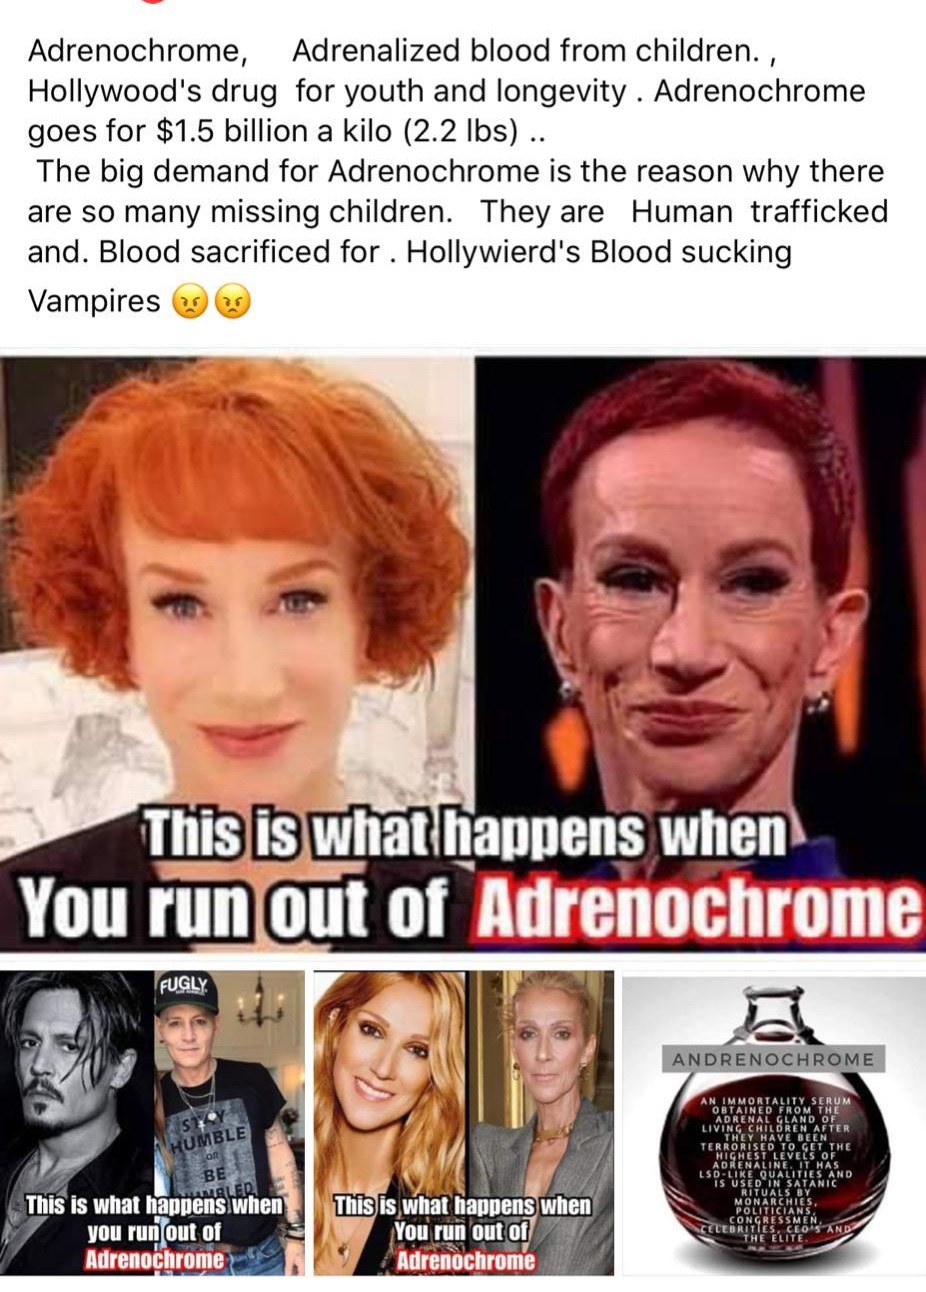 adrenochrome kathy griffin - Adrenochrome, Adrenalized blood from children. , Hollywood's drug for youth and longevity. Adrenochrome goes for $1.5 billion a kilo 2.2 lbs .. The big demand for Adrenochrome is the reason why there are so many missing childr